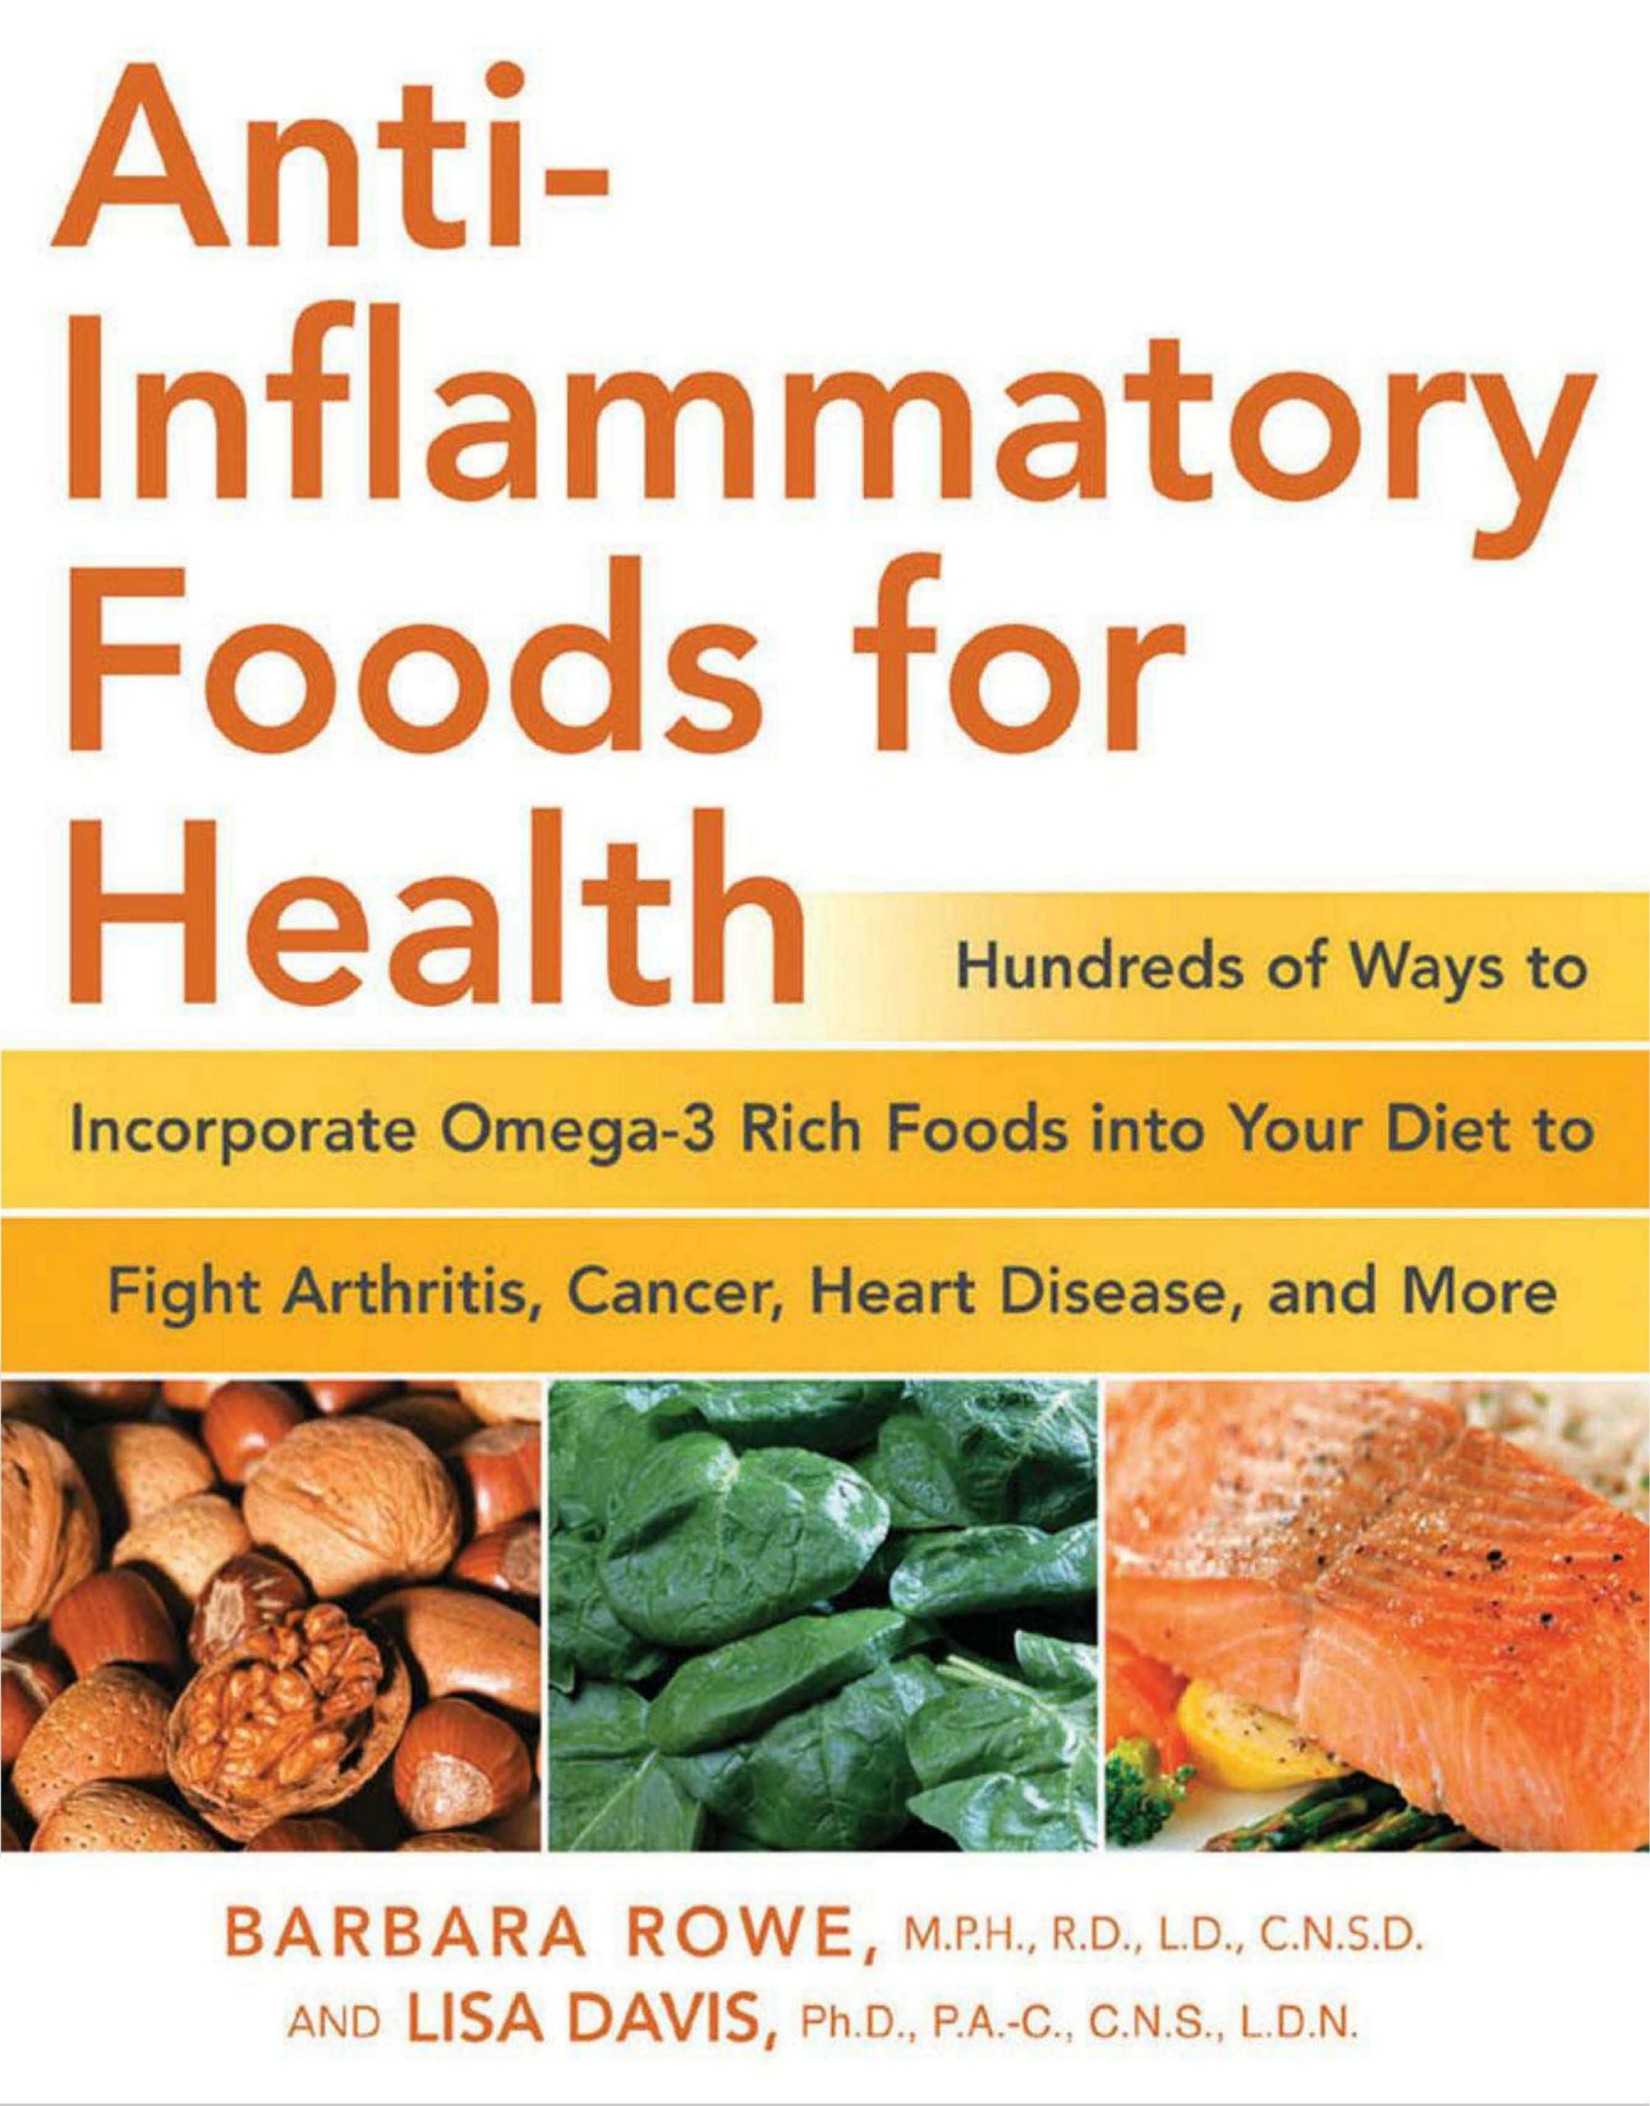 Anti Inflammatory Foods for Health  Hundreds of Ways to Incorporate Omega 3 Rich Foods into Your Diet 2008